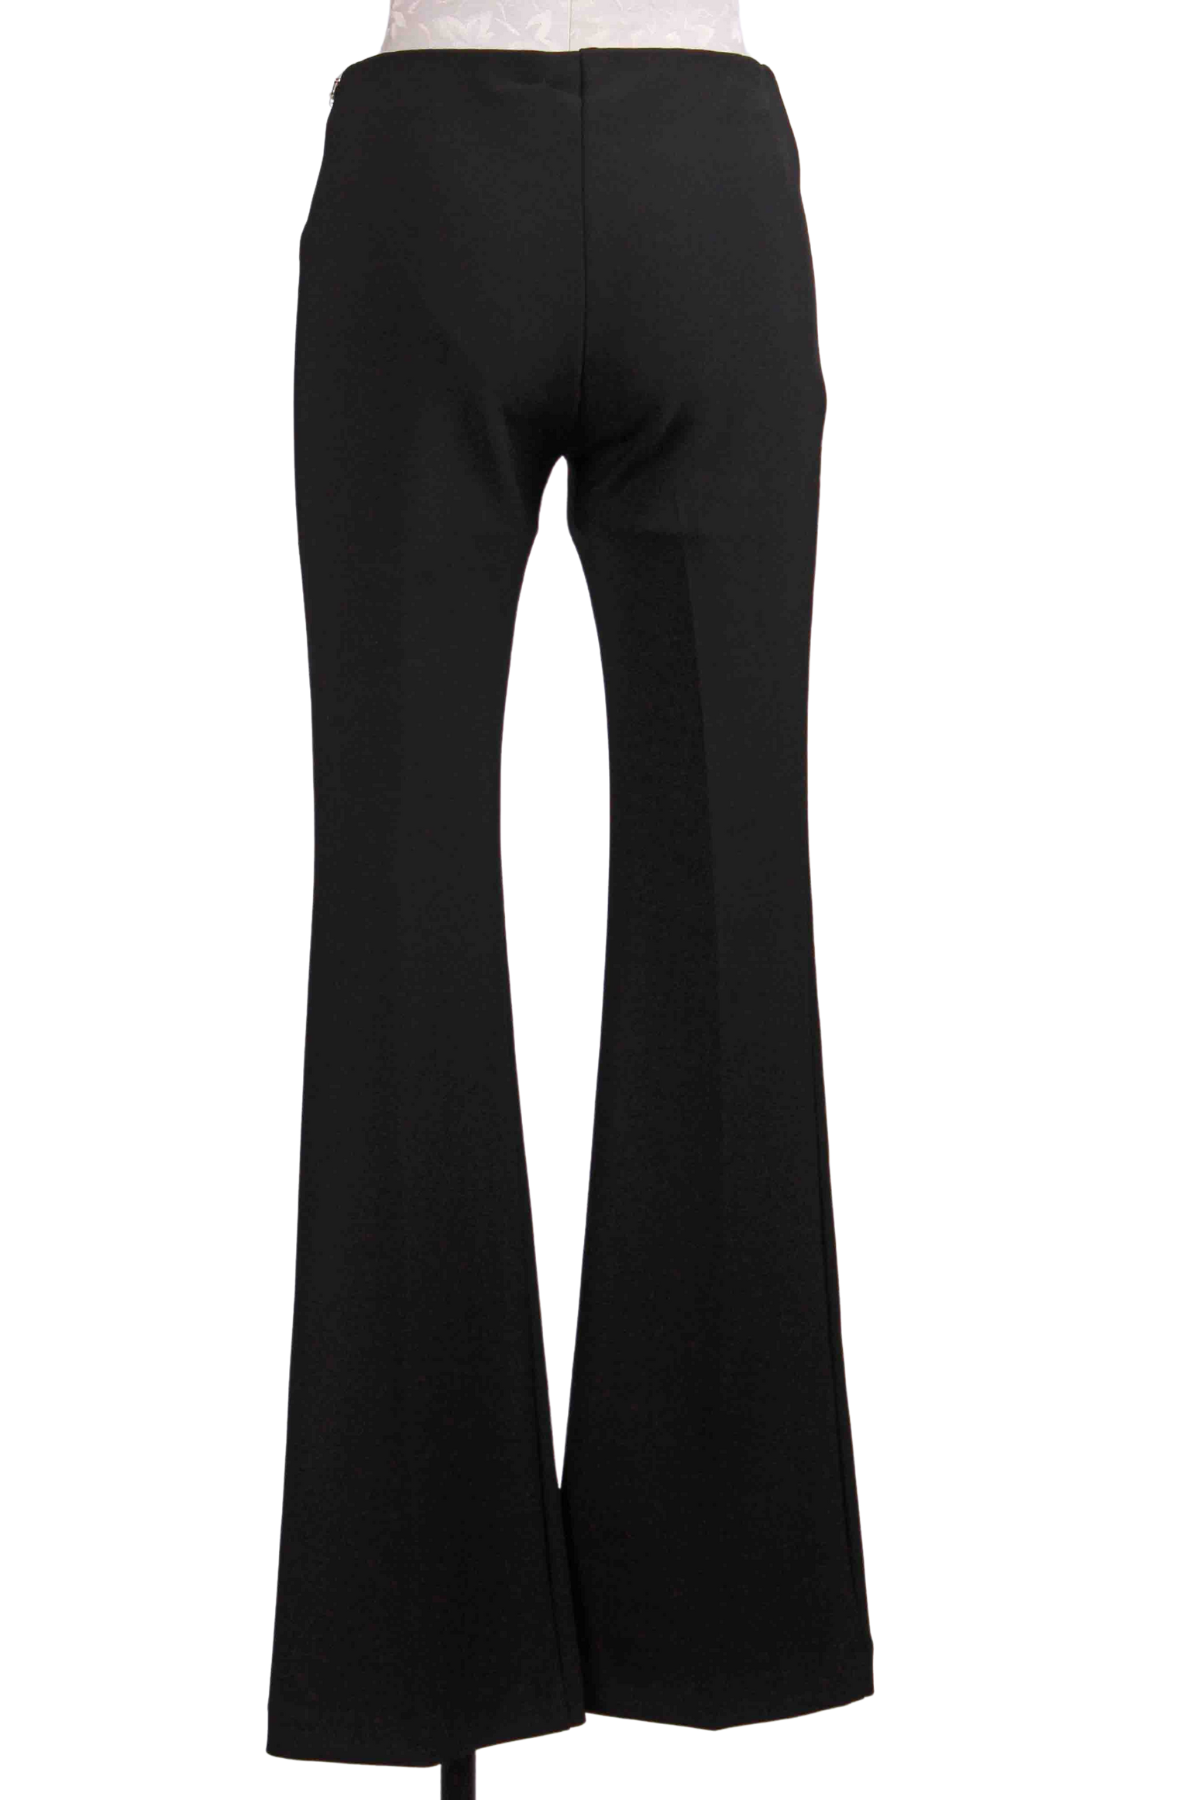 back view of black Classic Style Bootcut Pant by Fifteen Twenty